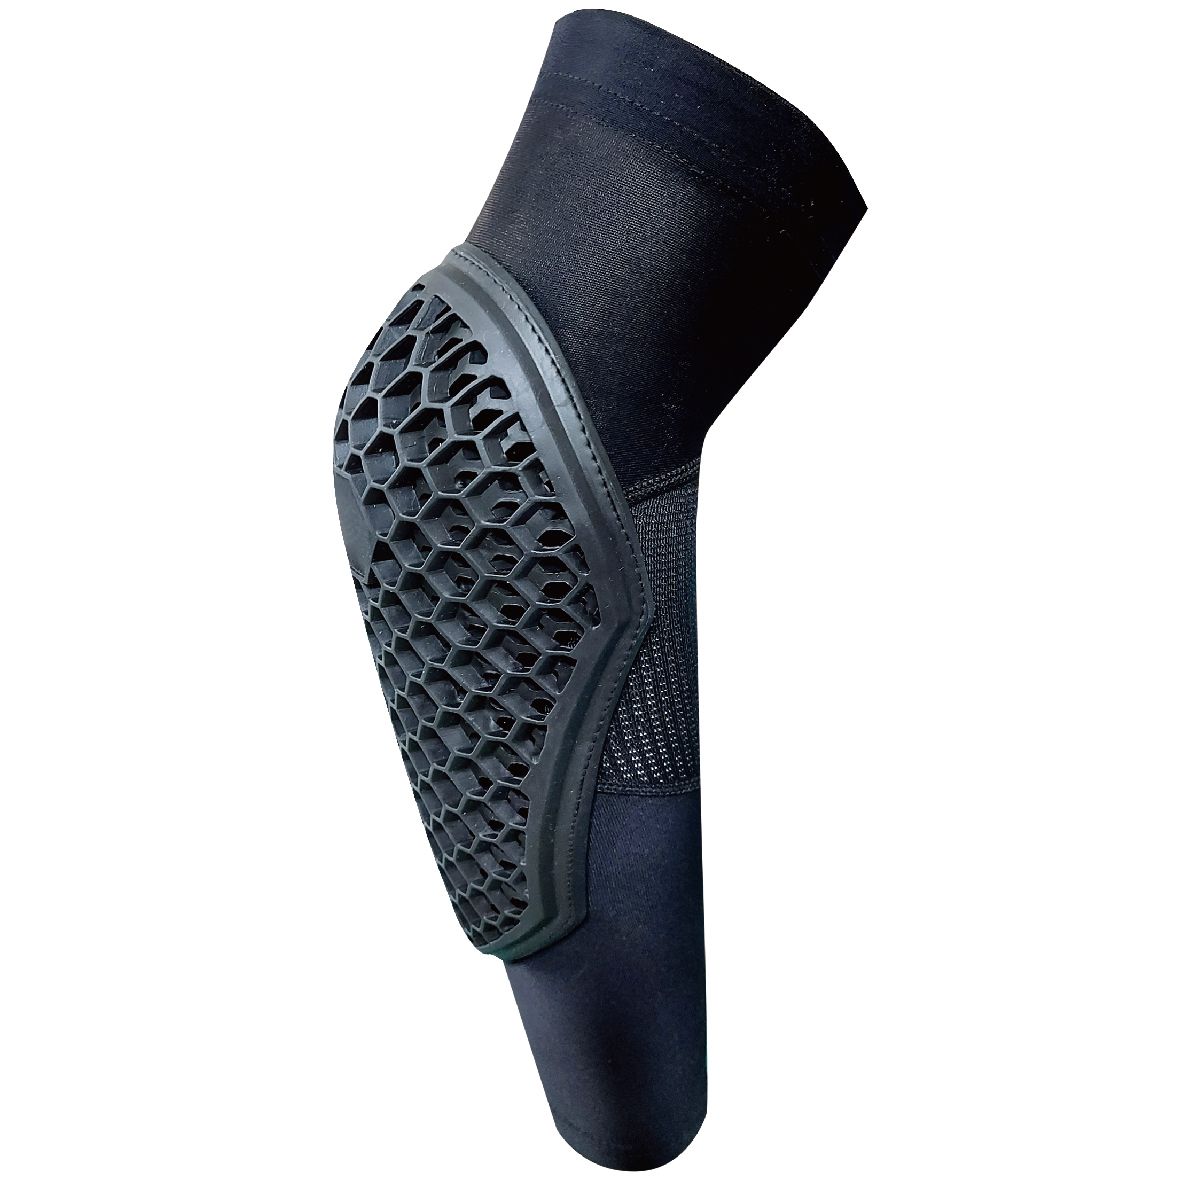 VAPP-injection Elbow Sleeves G817L